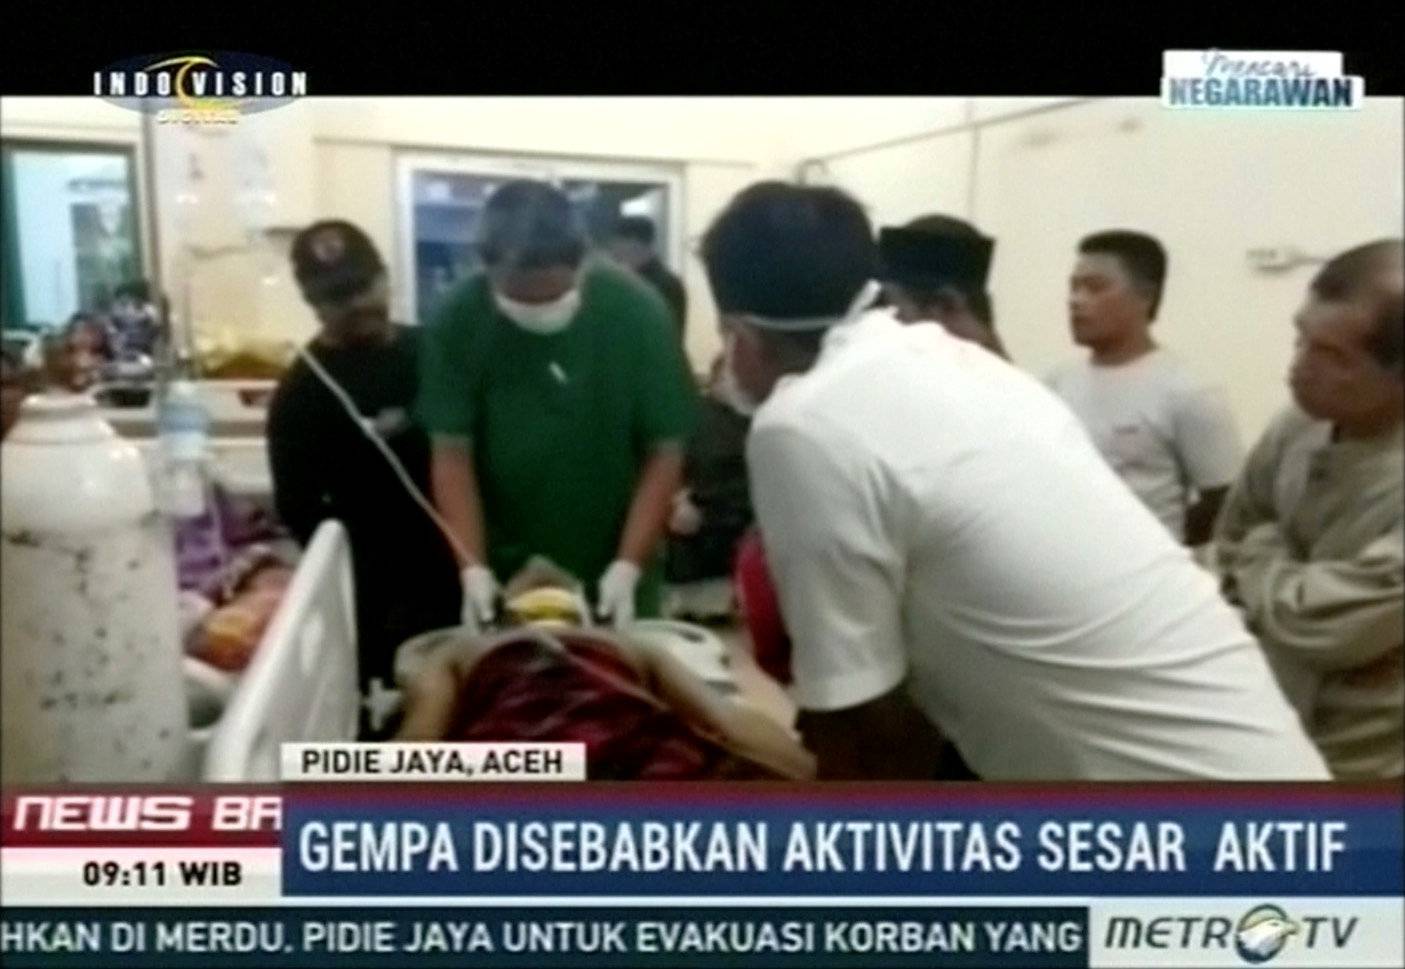 A doctor examines a patient in a hospital following an earthquake in Pidie Jaya, Aceh, Indonesia in this still frame taken from video